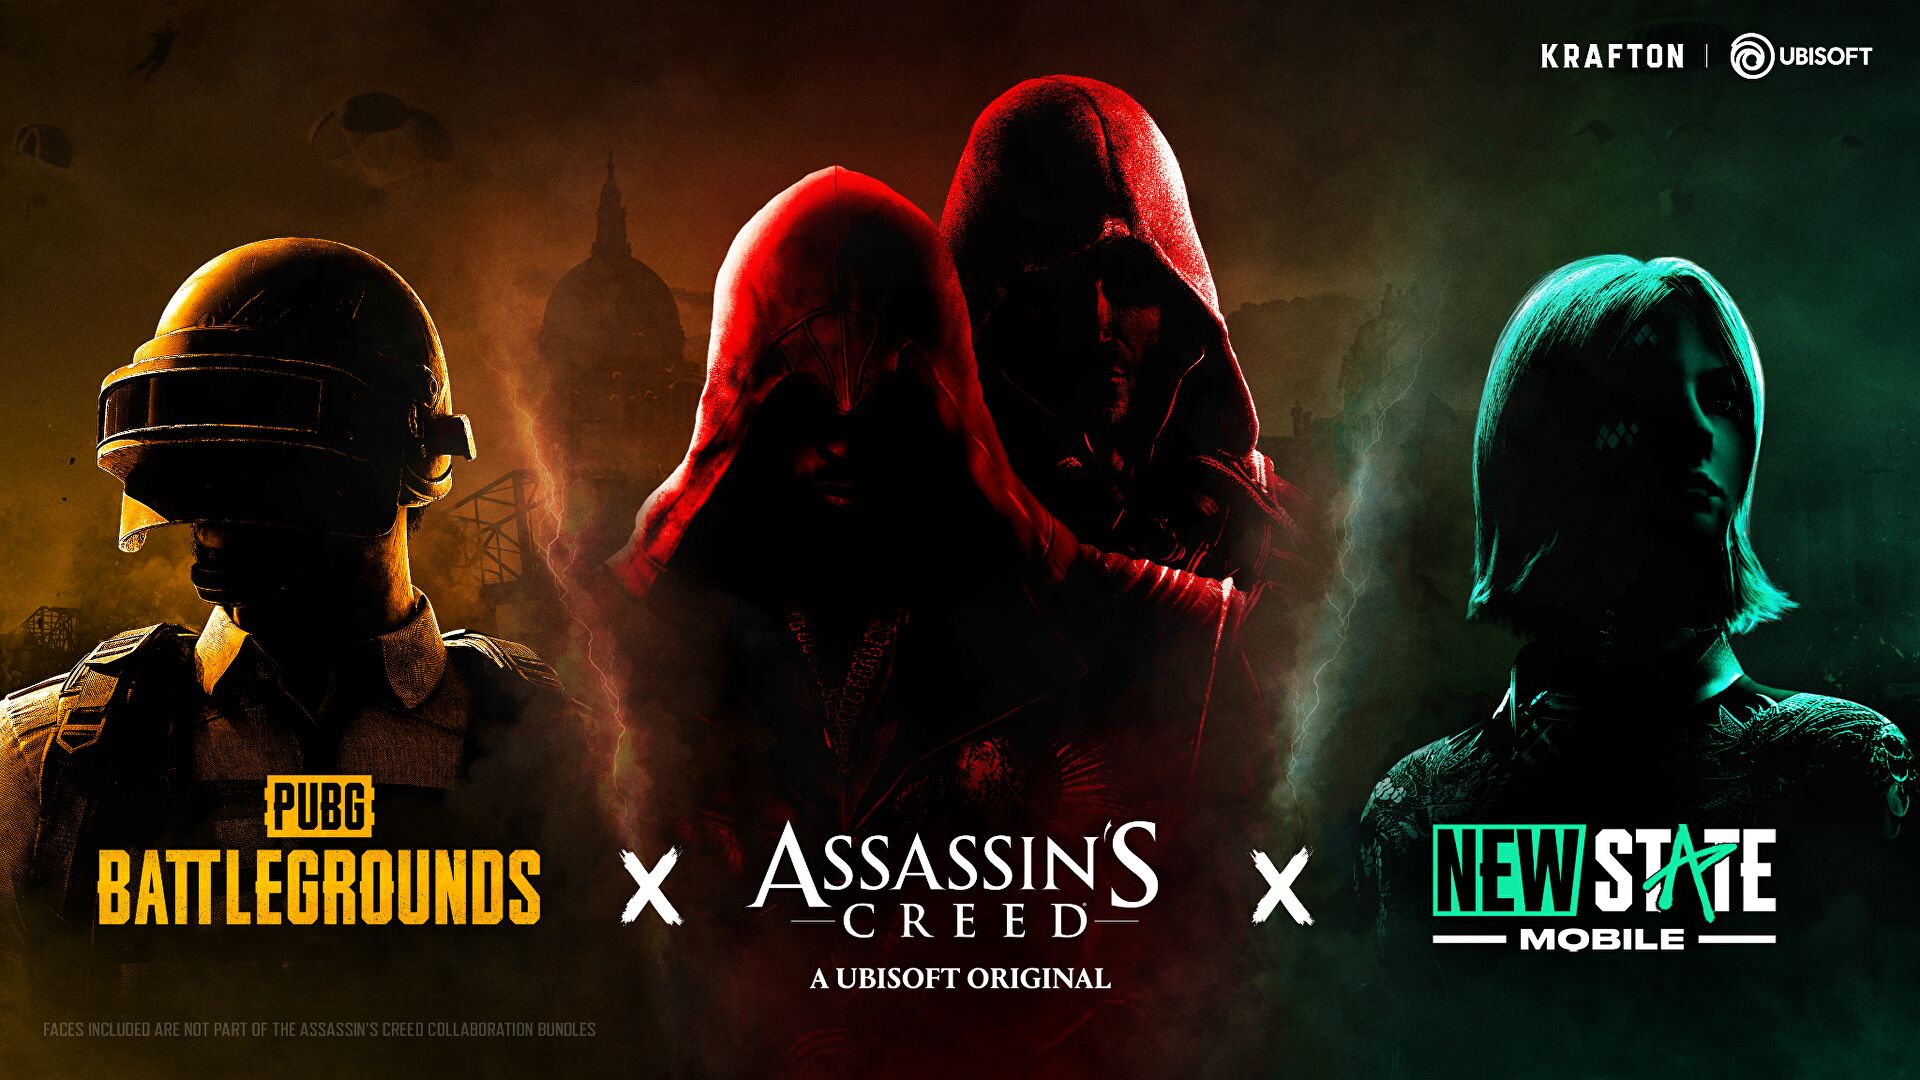 Assassin's Creed is coming to Pubg Battlegrounds next month